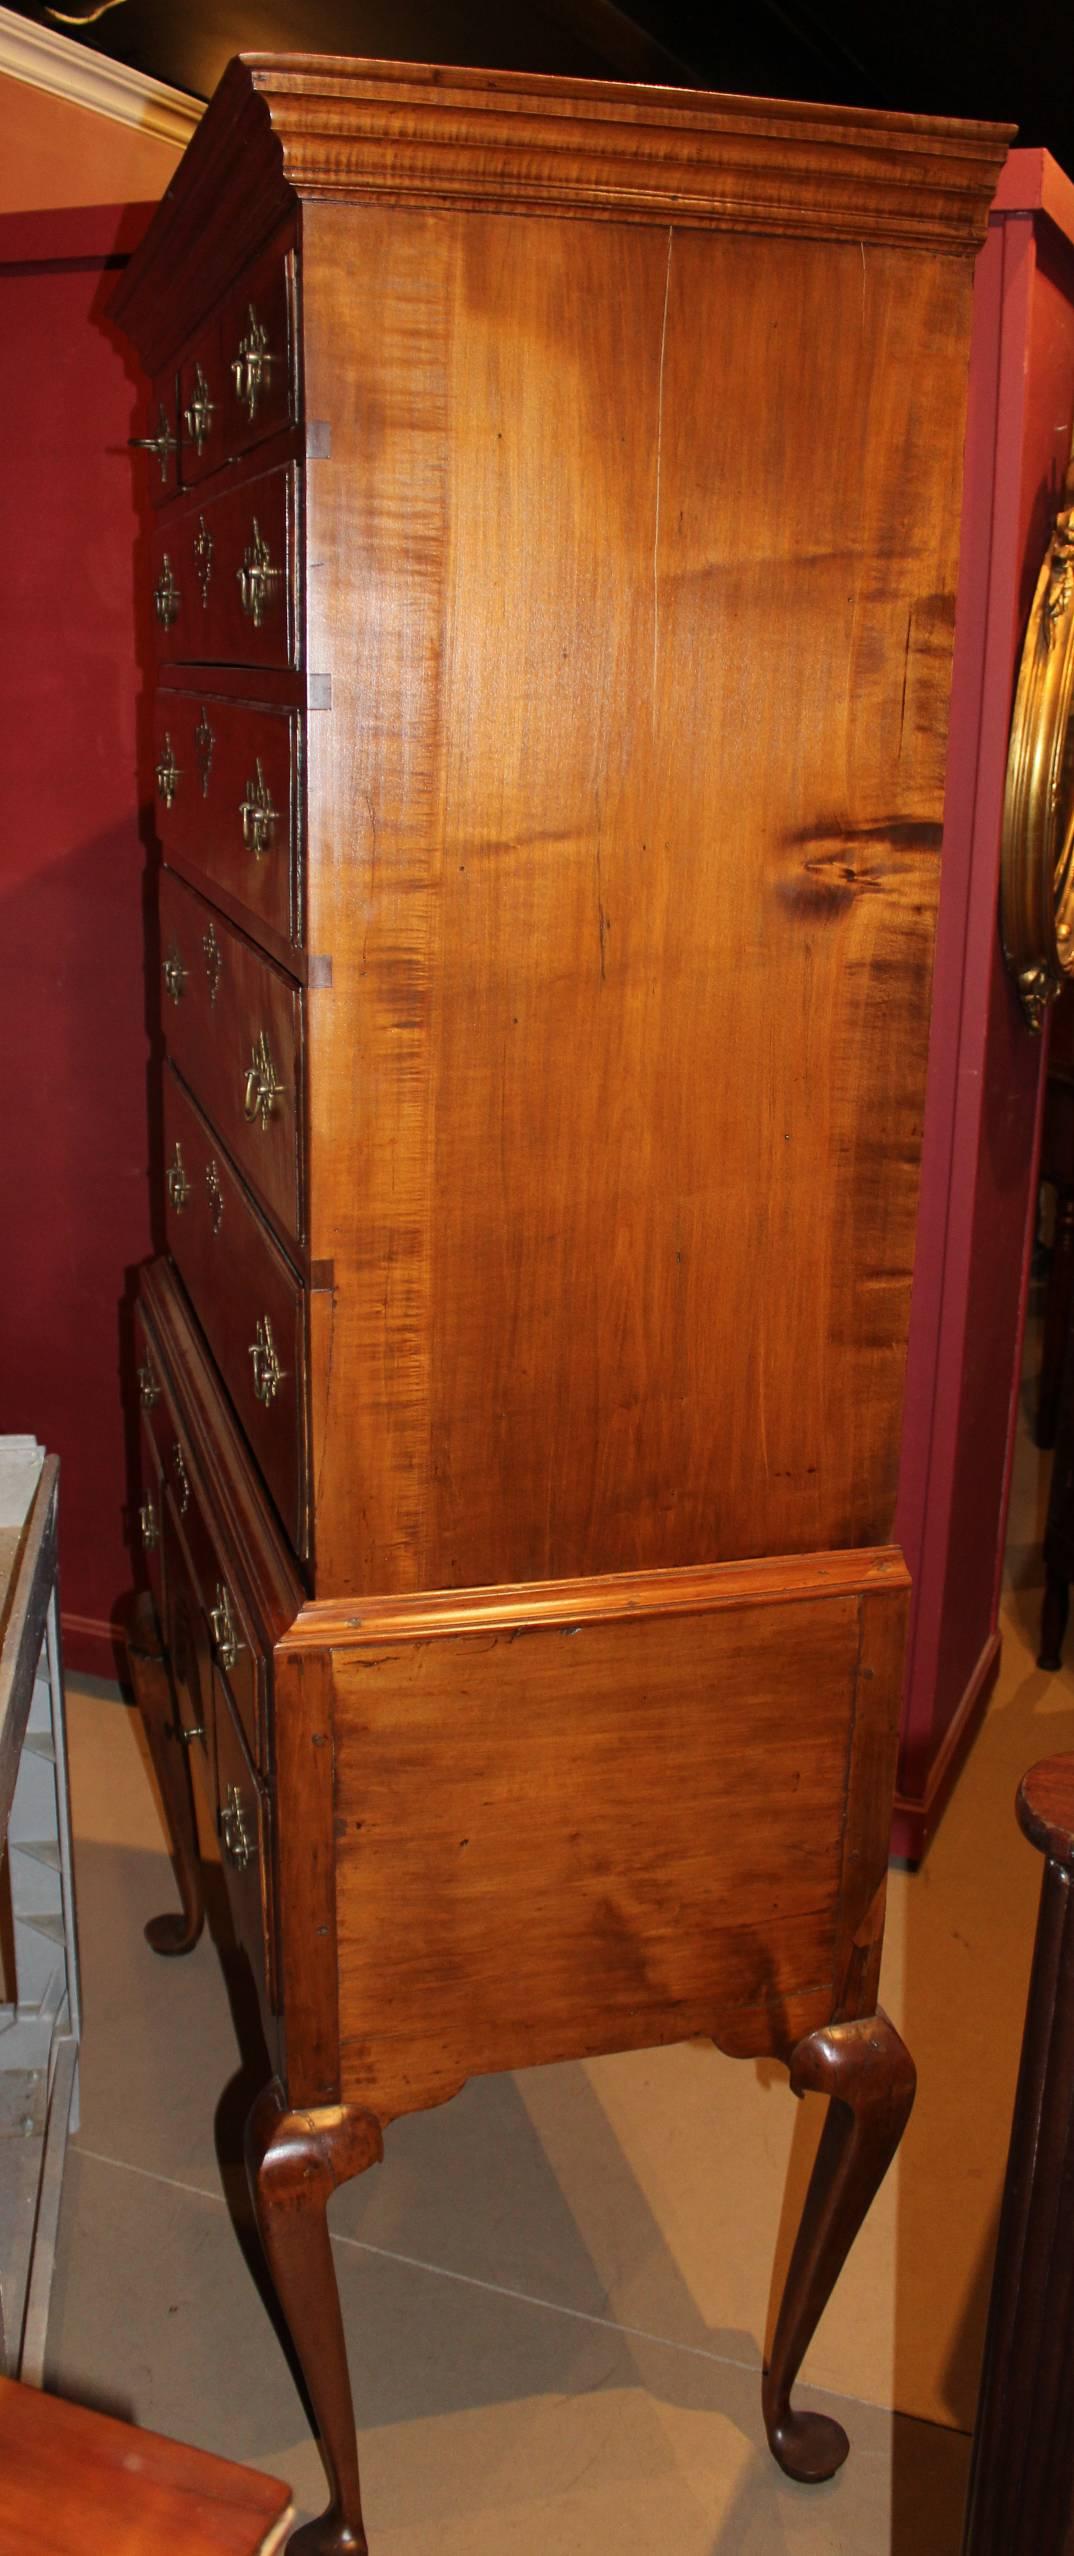 A fine two part 18th century Queen Anne tiger maple highboy, probably made in New Hampshire, its upper case with molded cornice surmounting three fitted short drawers over four graduated long drawers, and associated lower case with single long